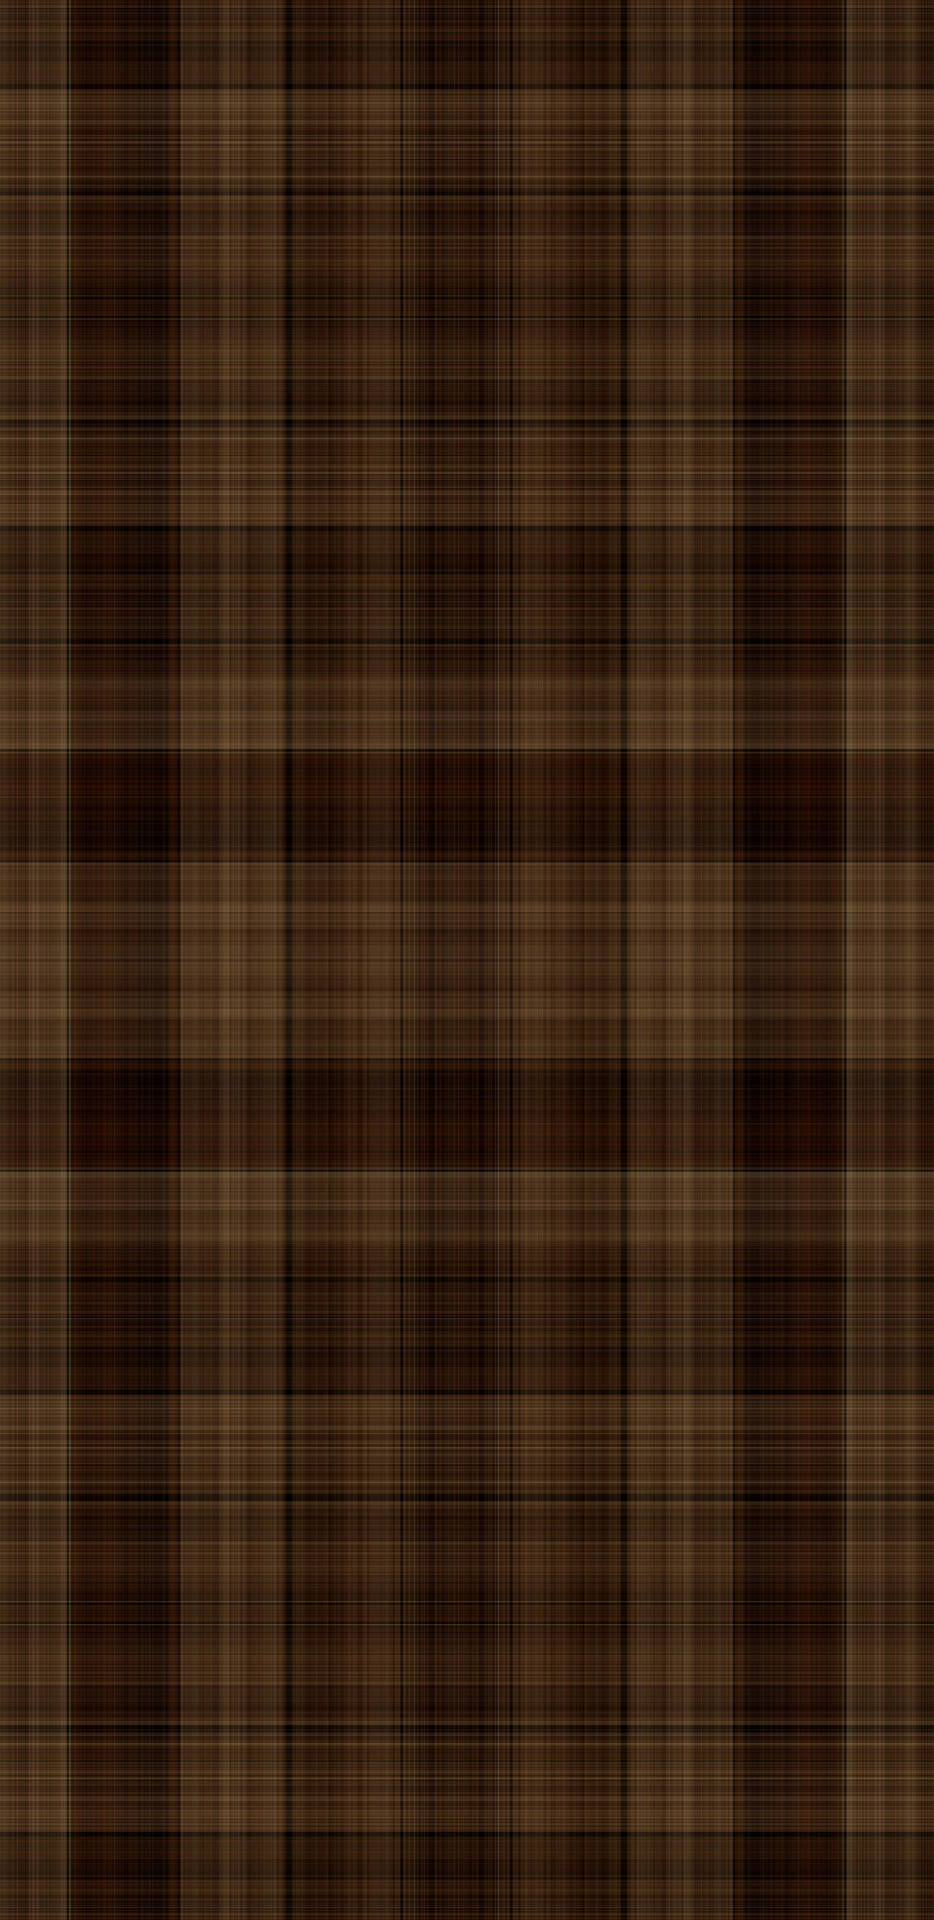 Plaid Pattern Brown Iphone Background